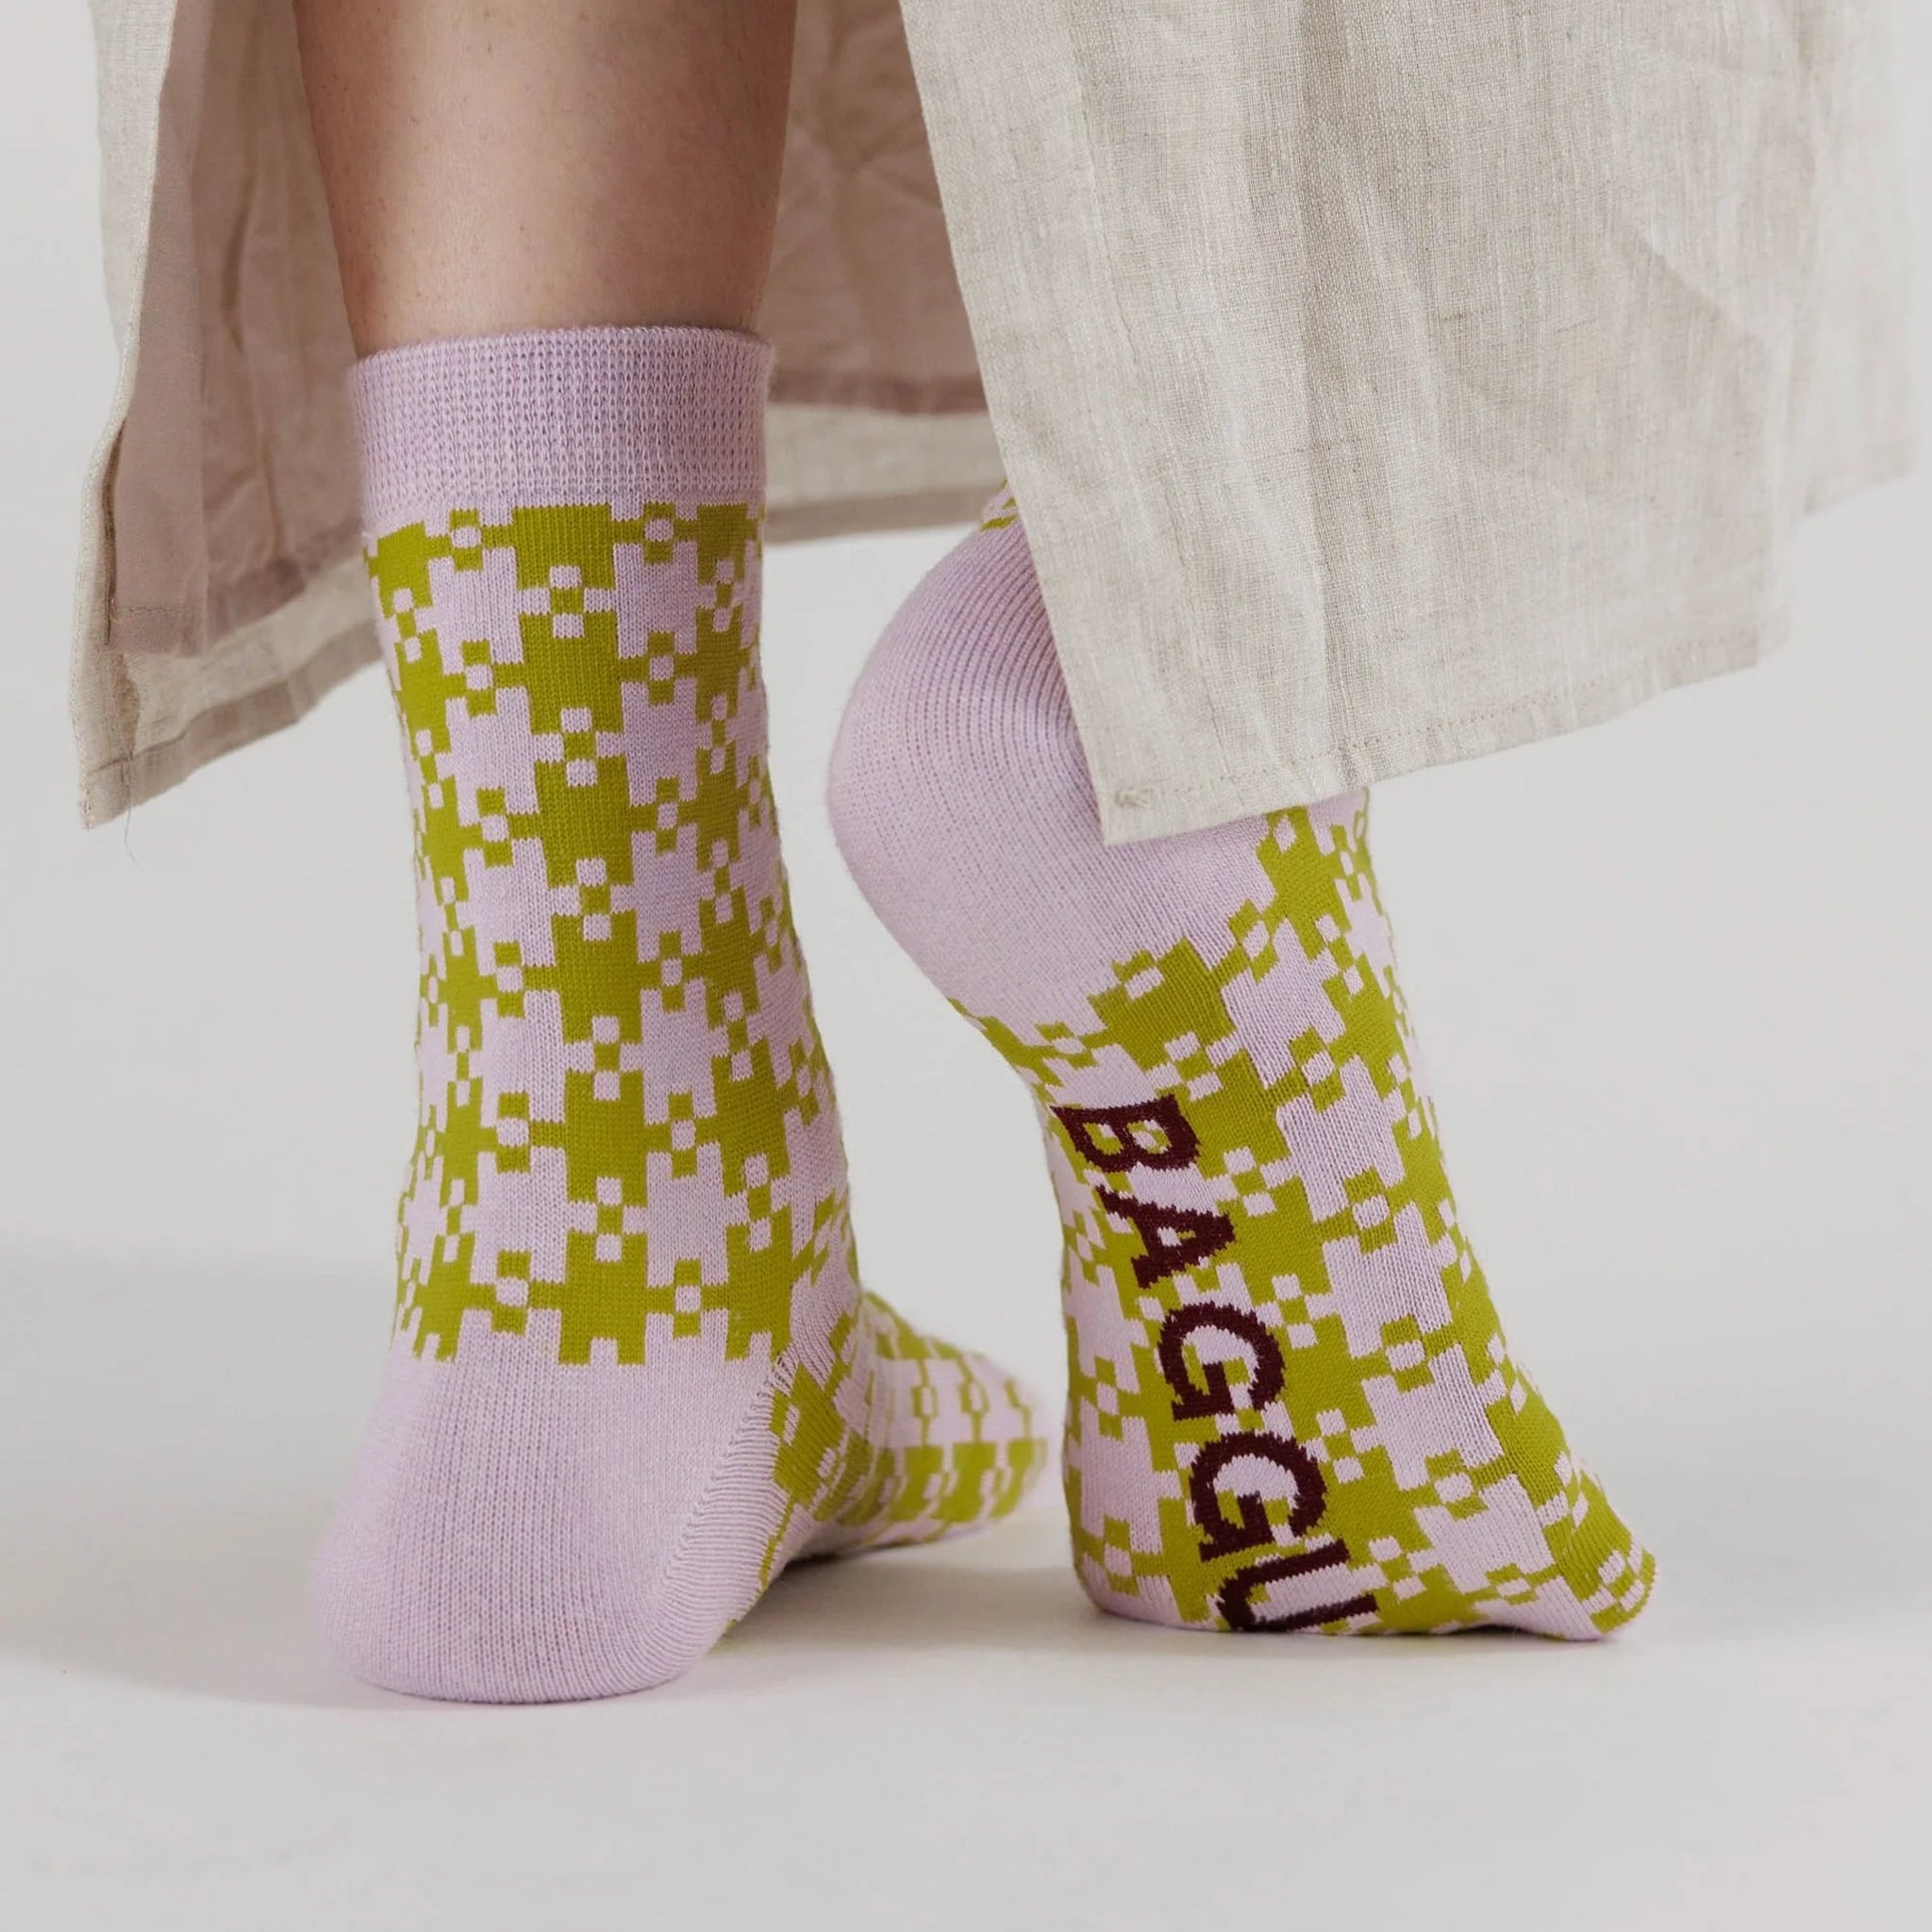 On a white background is a pair of pink and green gingham printed socks.